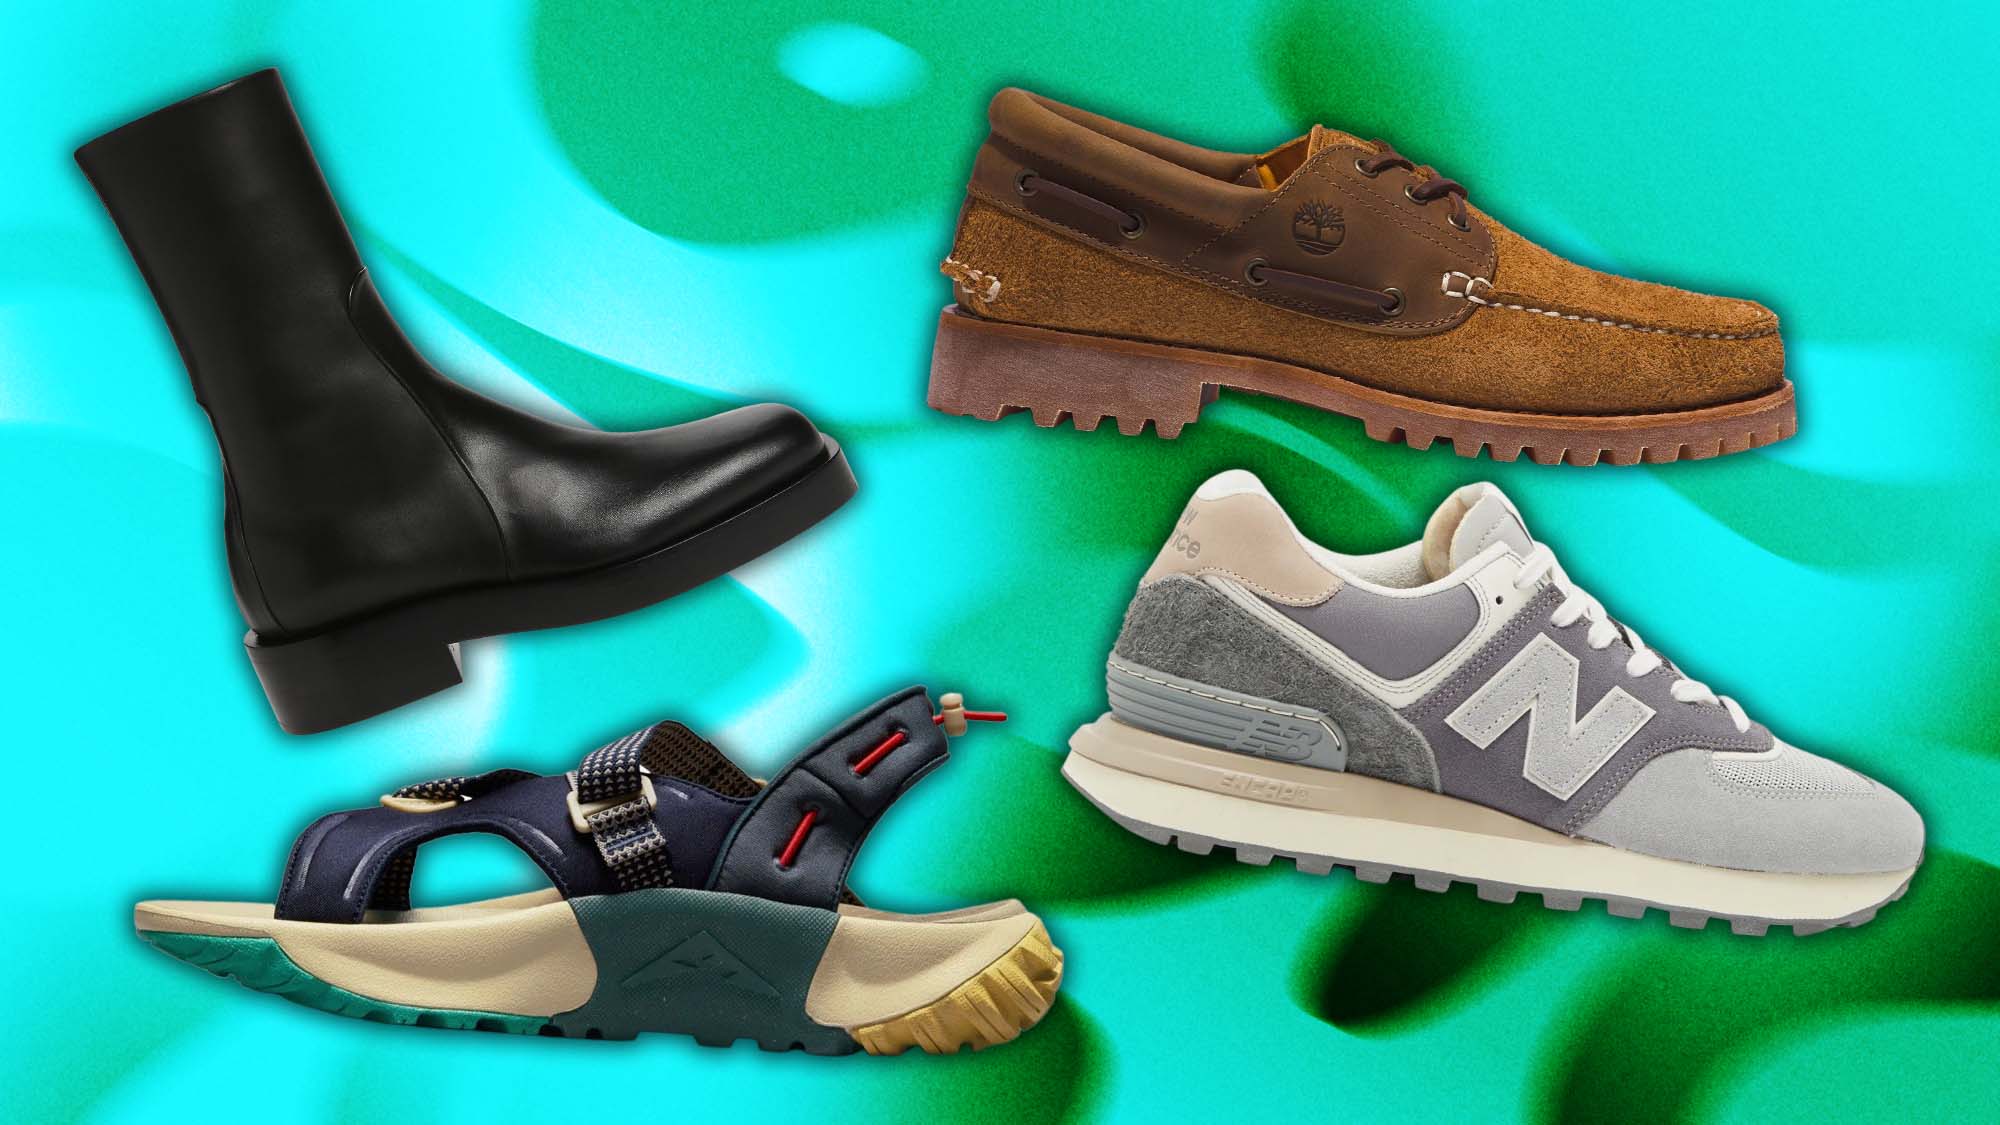 the-nordstrom-sale-is-positively-brimming-with-sick-kicks